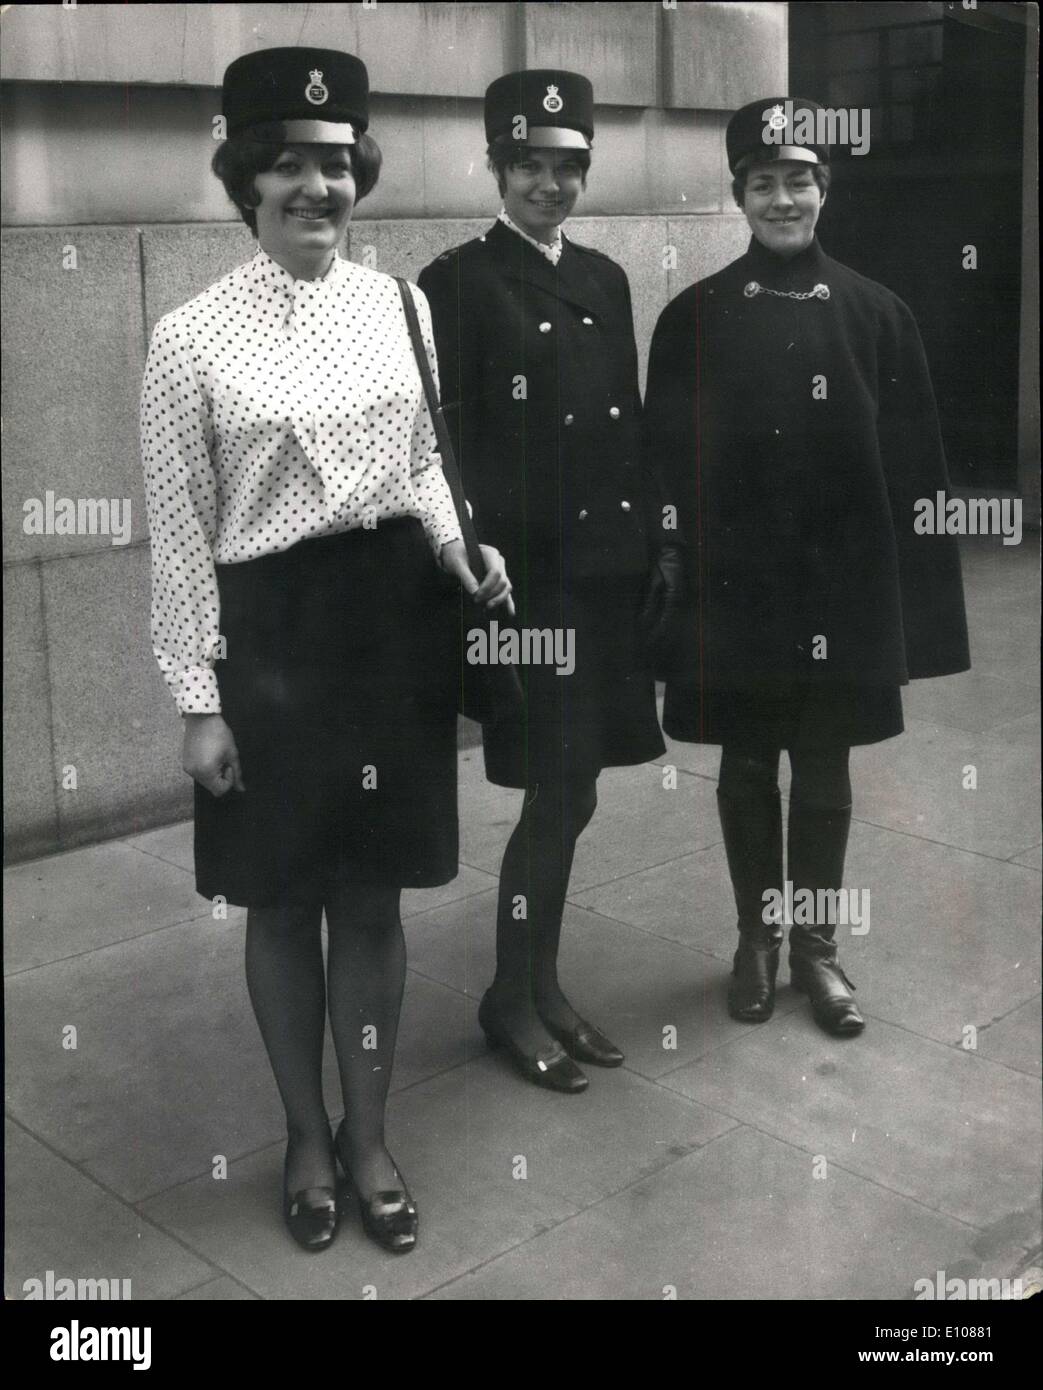 Mar. 03, 1970 - Latest fashion for Policewomen: Navy blue polka dotted nylon blouses are now part of the uniform for City of London Policewomen, who are also being issued with mid calf winter boots add new shoes. Photo shows (left to right) W/PC's Jenny Hines, of Brighton, wearing the blouse and skirt summer outfit; Carol Ofertelli of Bournemouth, wearing the ordinary uniform, and Dorothy Turner, of Wolverton, wearing the winter uniform pictured in London today. Stock Photo